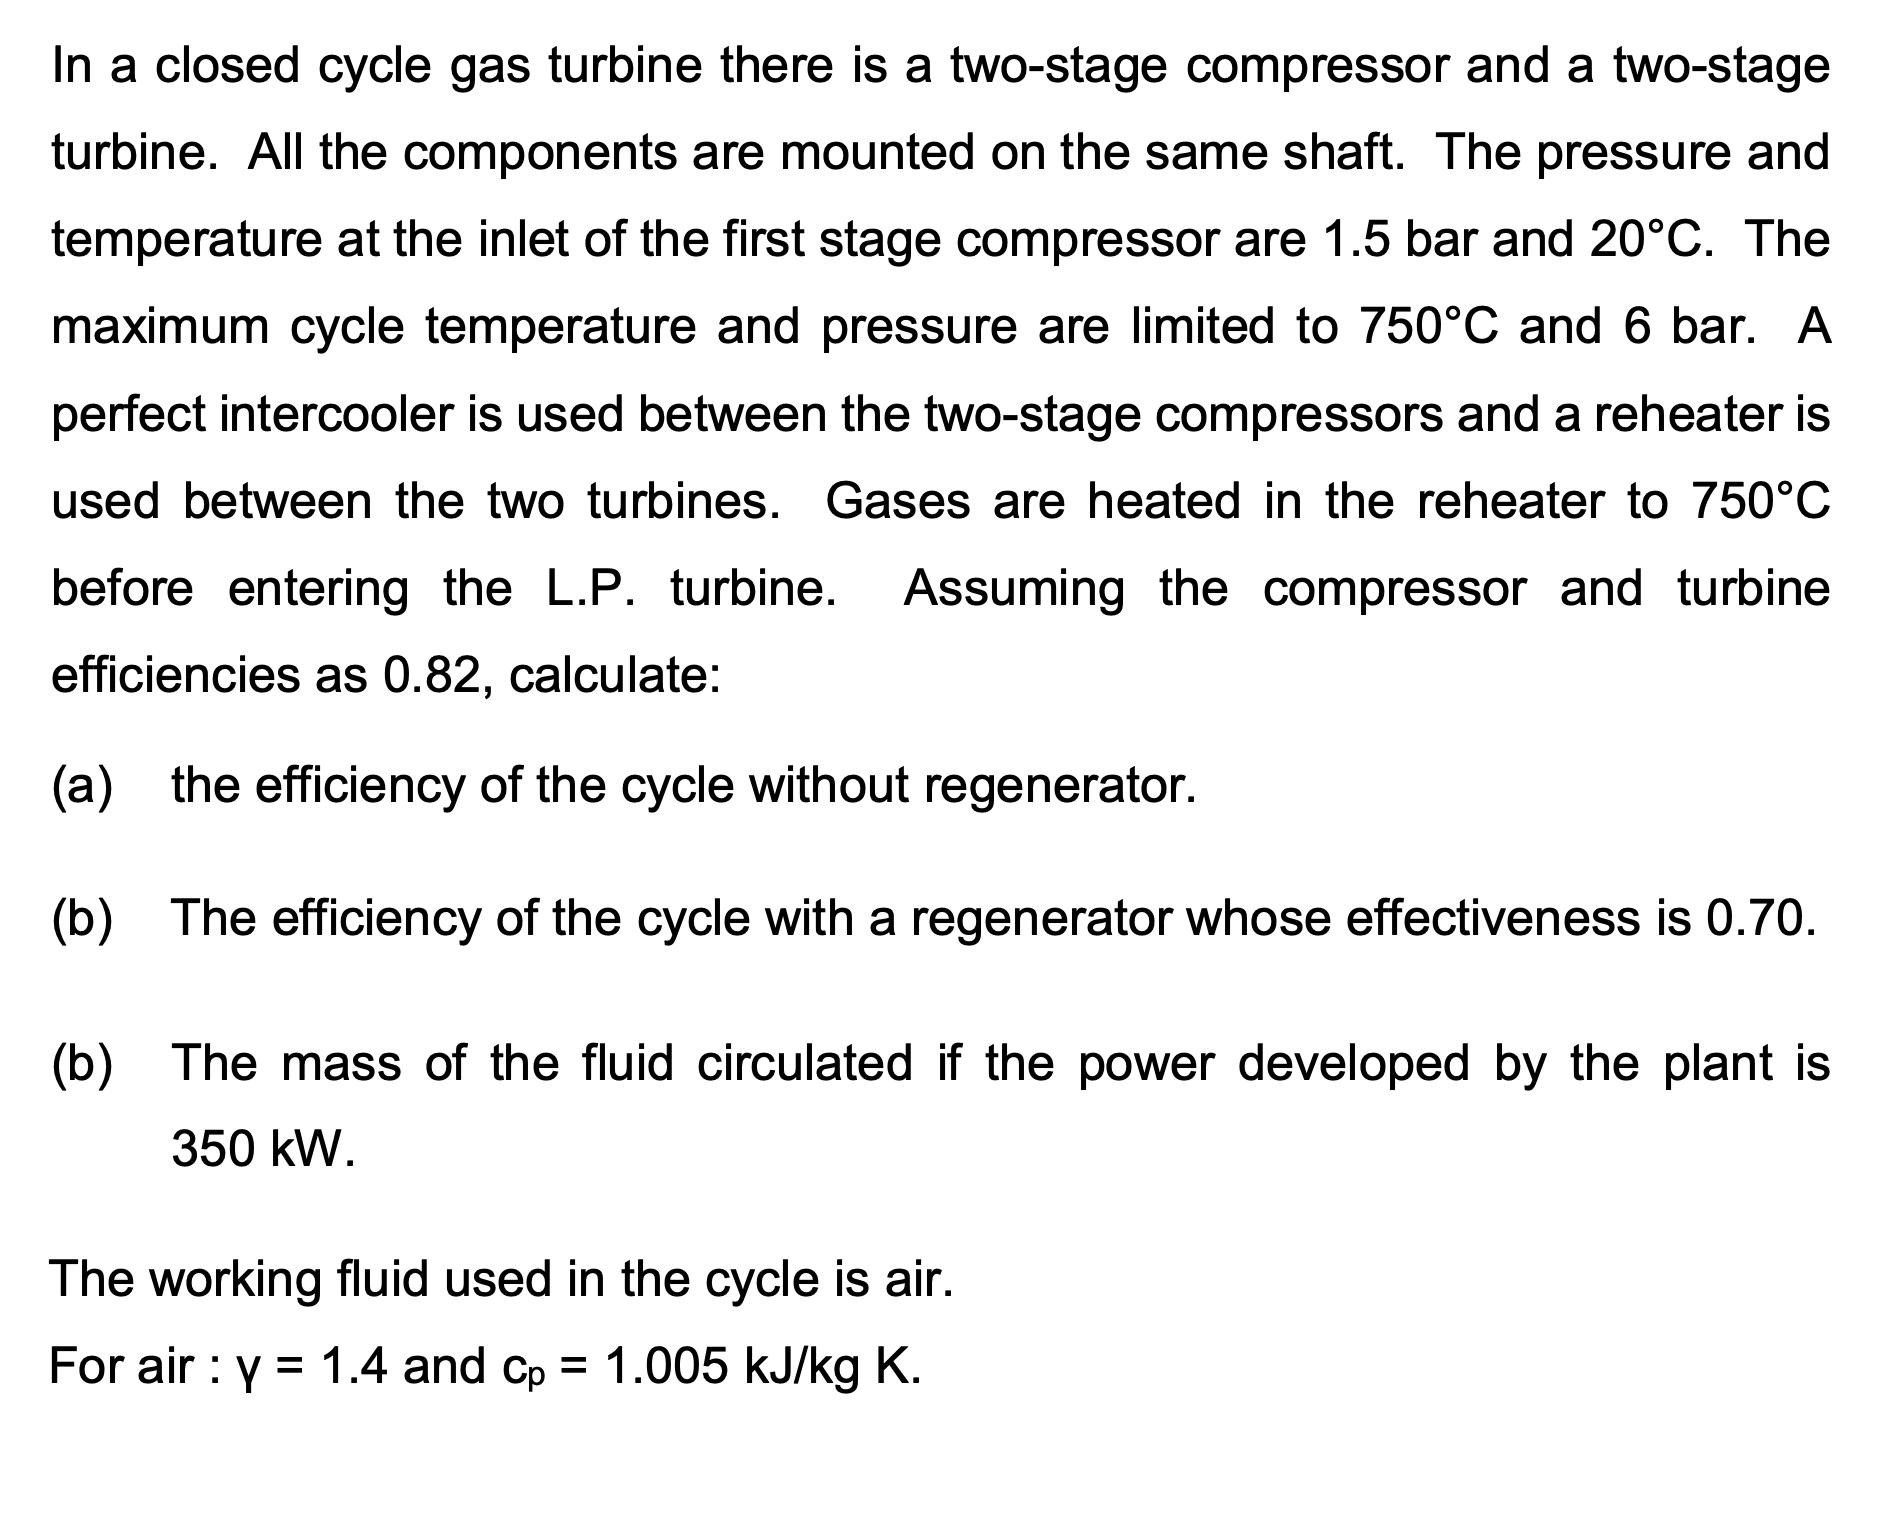 In a closed cycle gas turbine there is a two-stage compressor and a two-stage turbine. All the components are